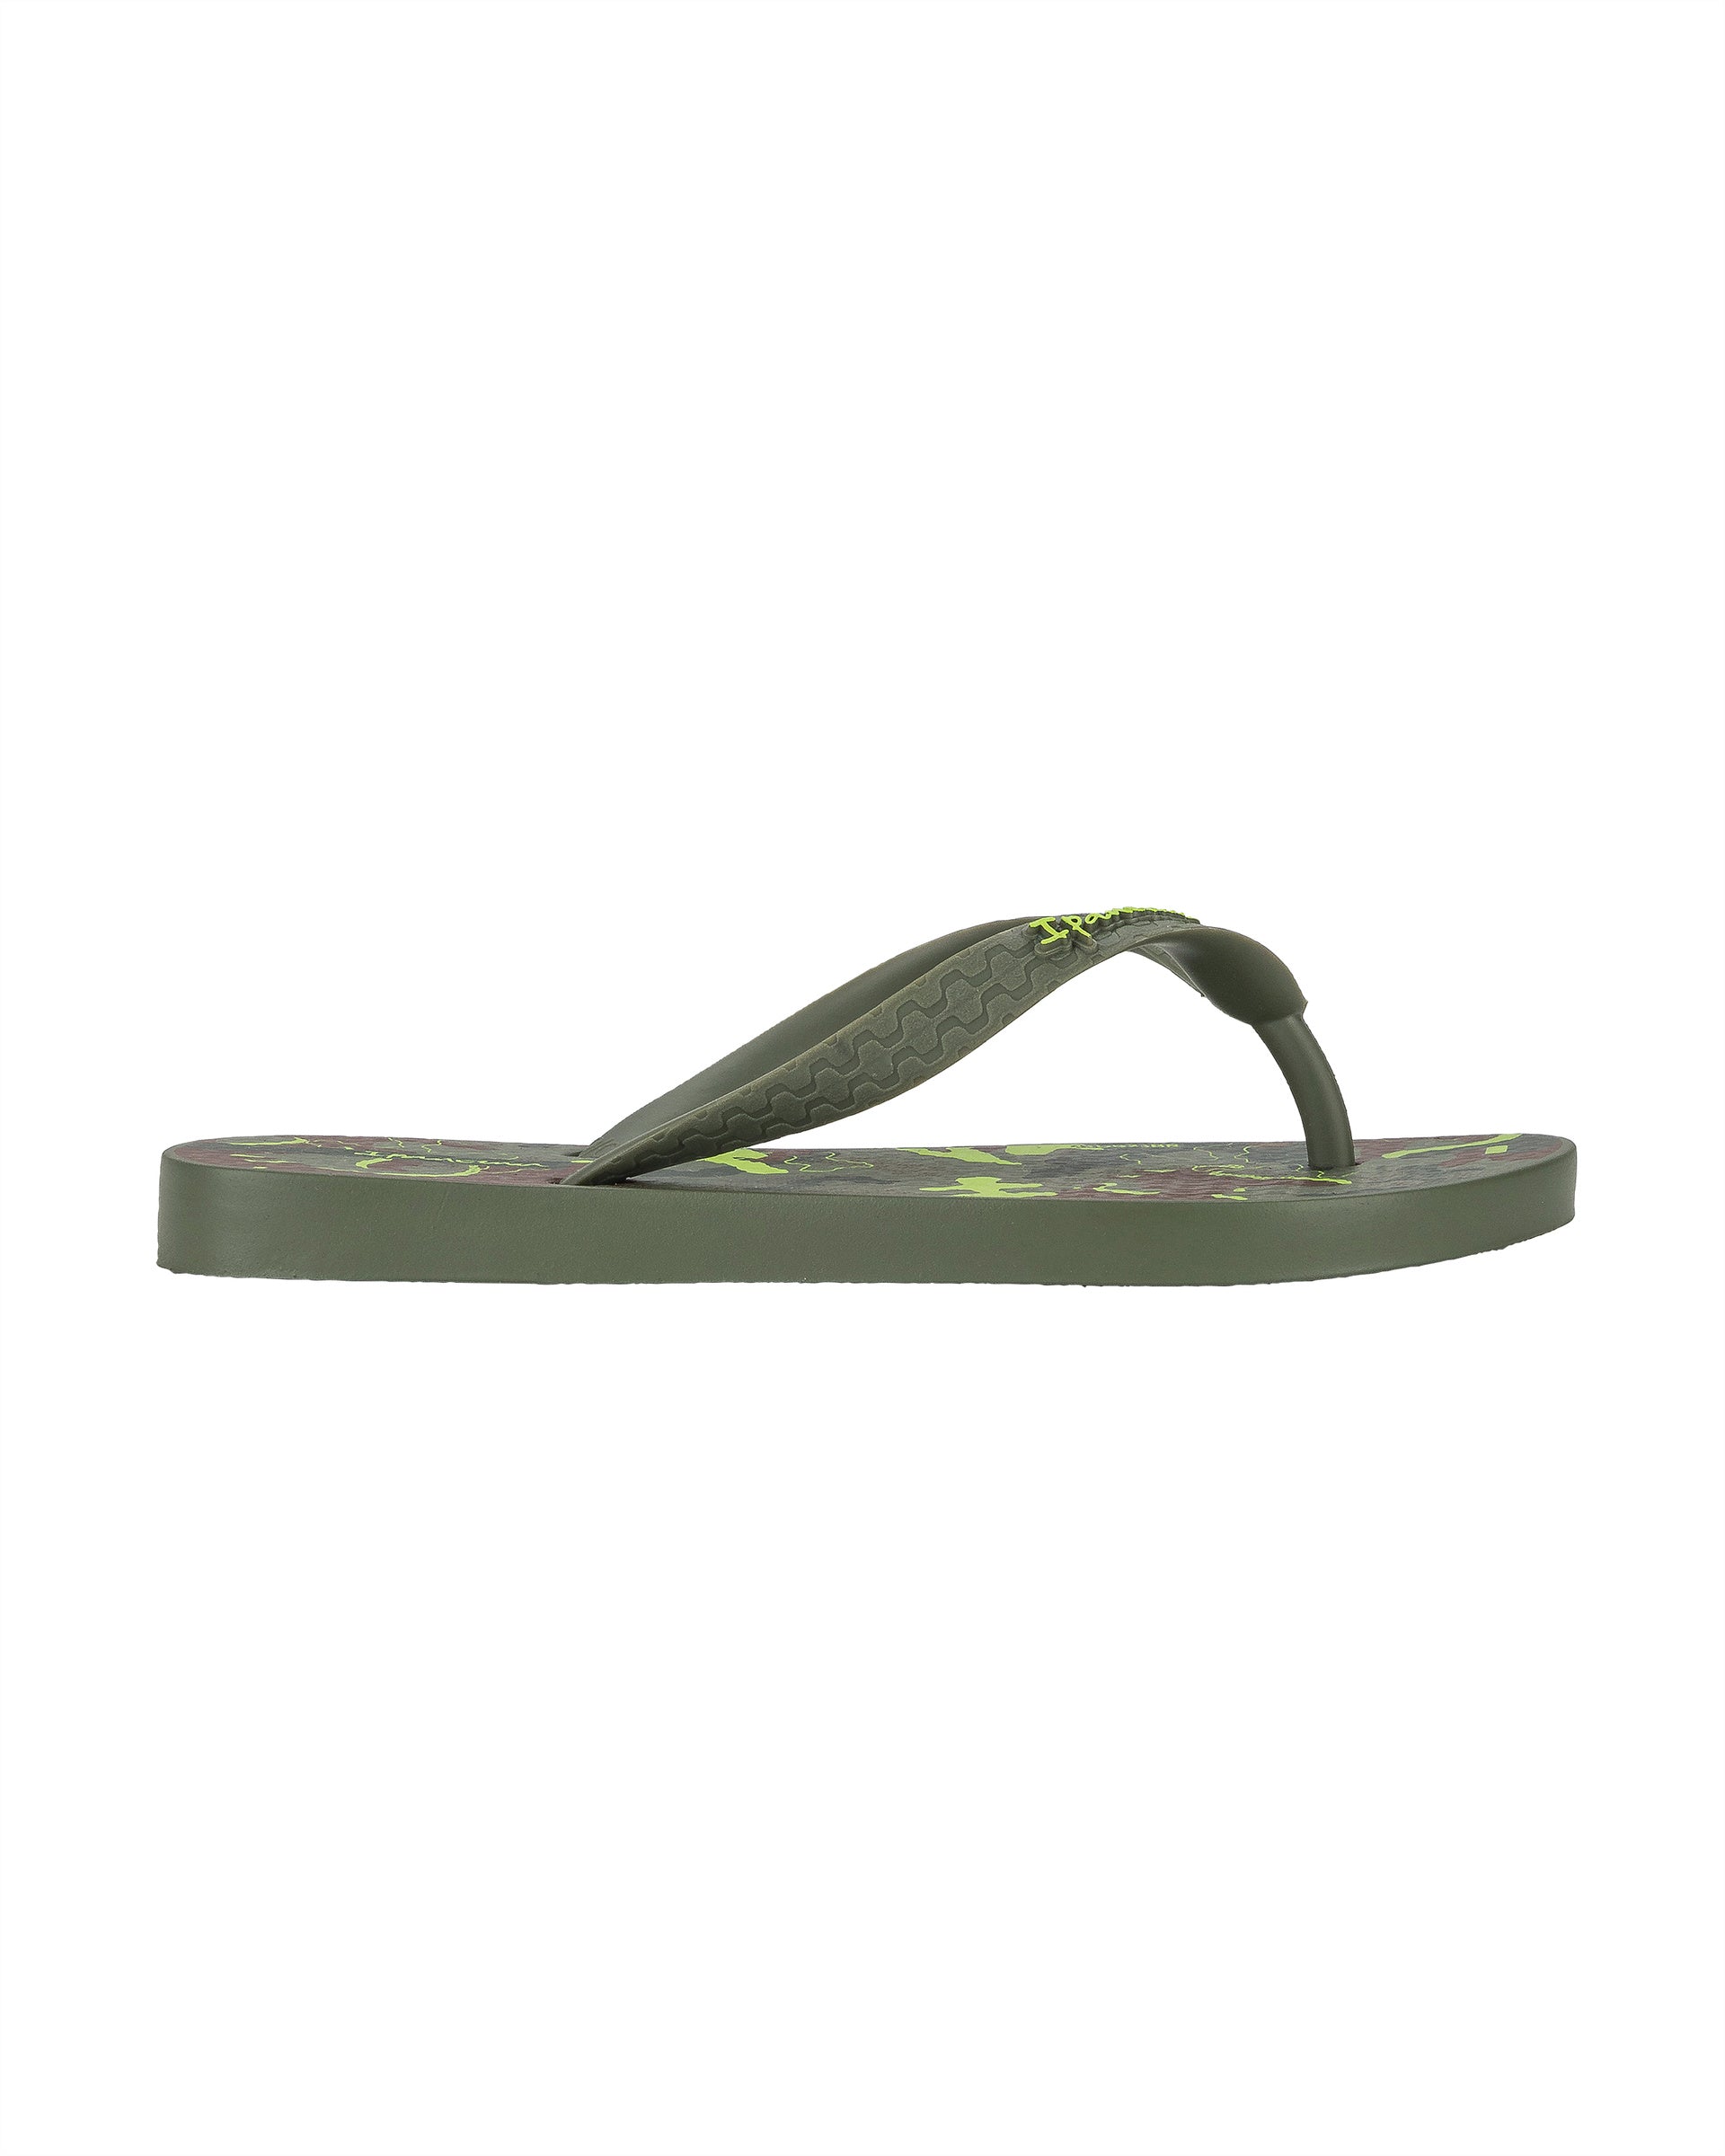 Outer side view of a green Ipanema Temas kids flip flop with camo print.